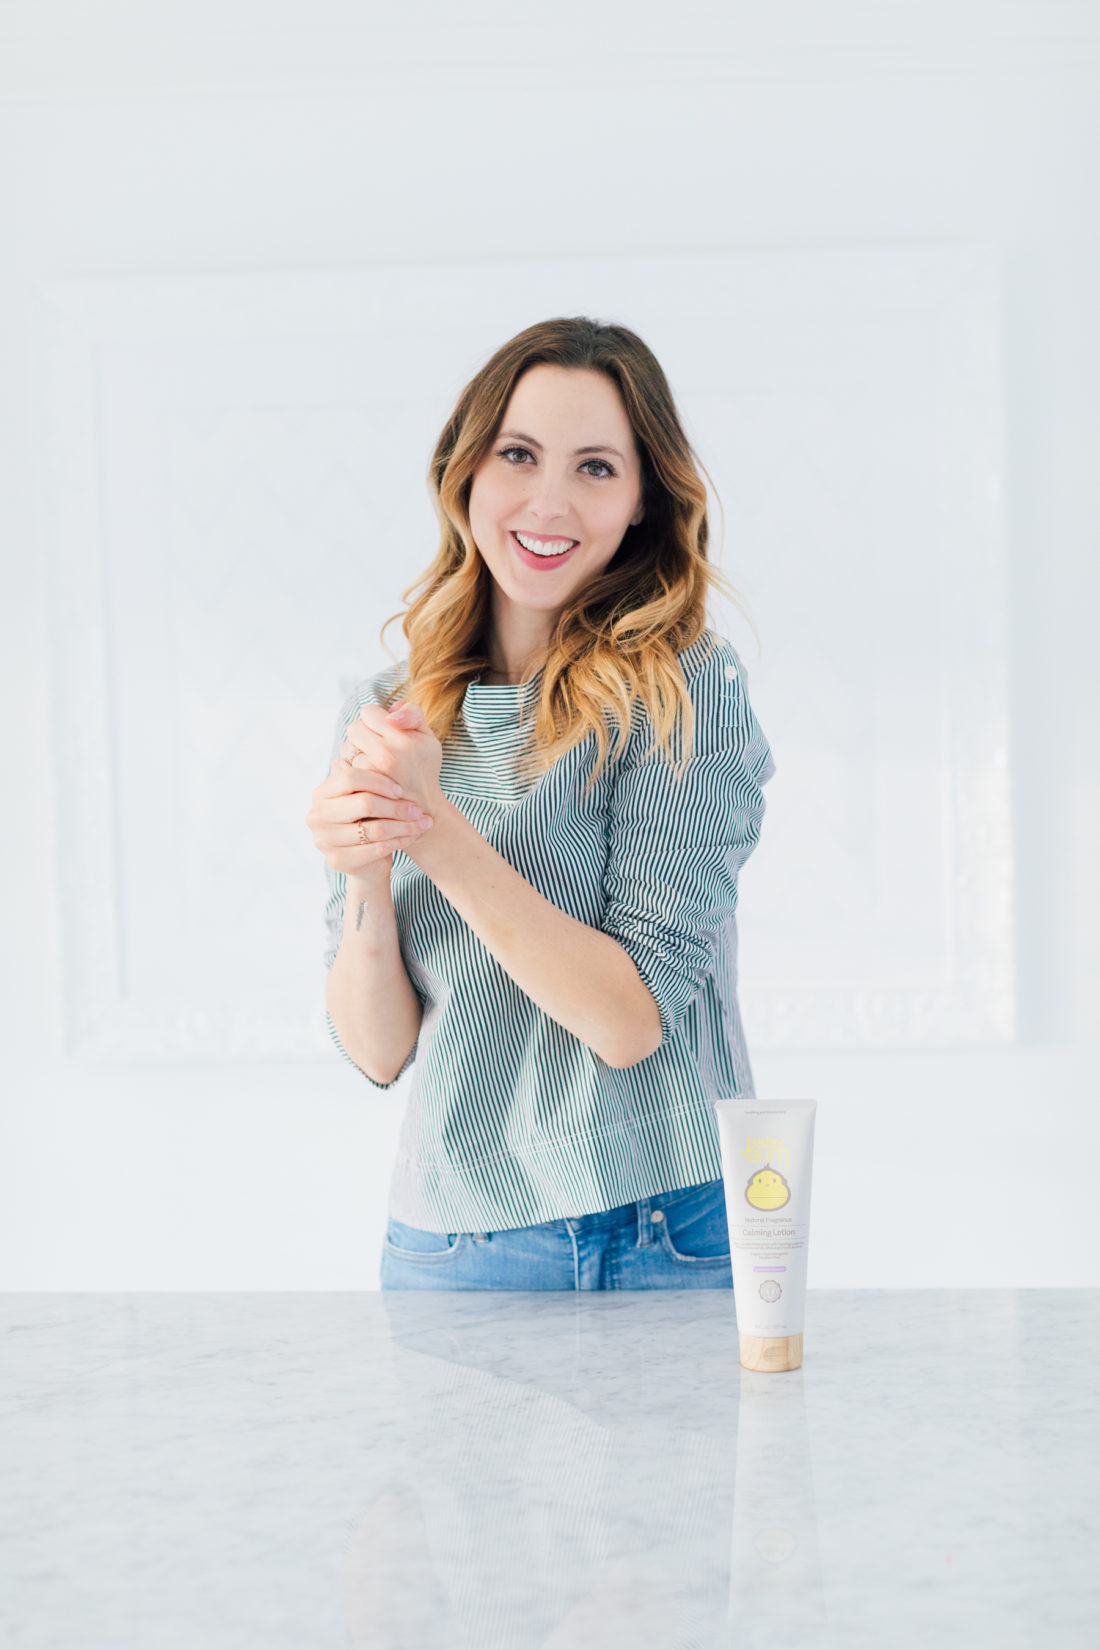 Eva Amurri Martino wears a striped boatneck top, and uses baby bum calming lotion to moisturize her hands and arms